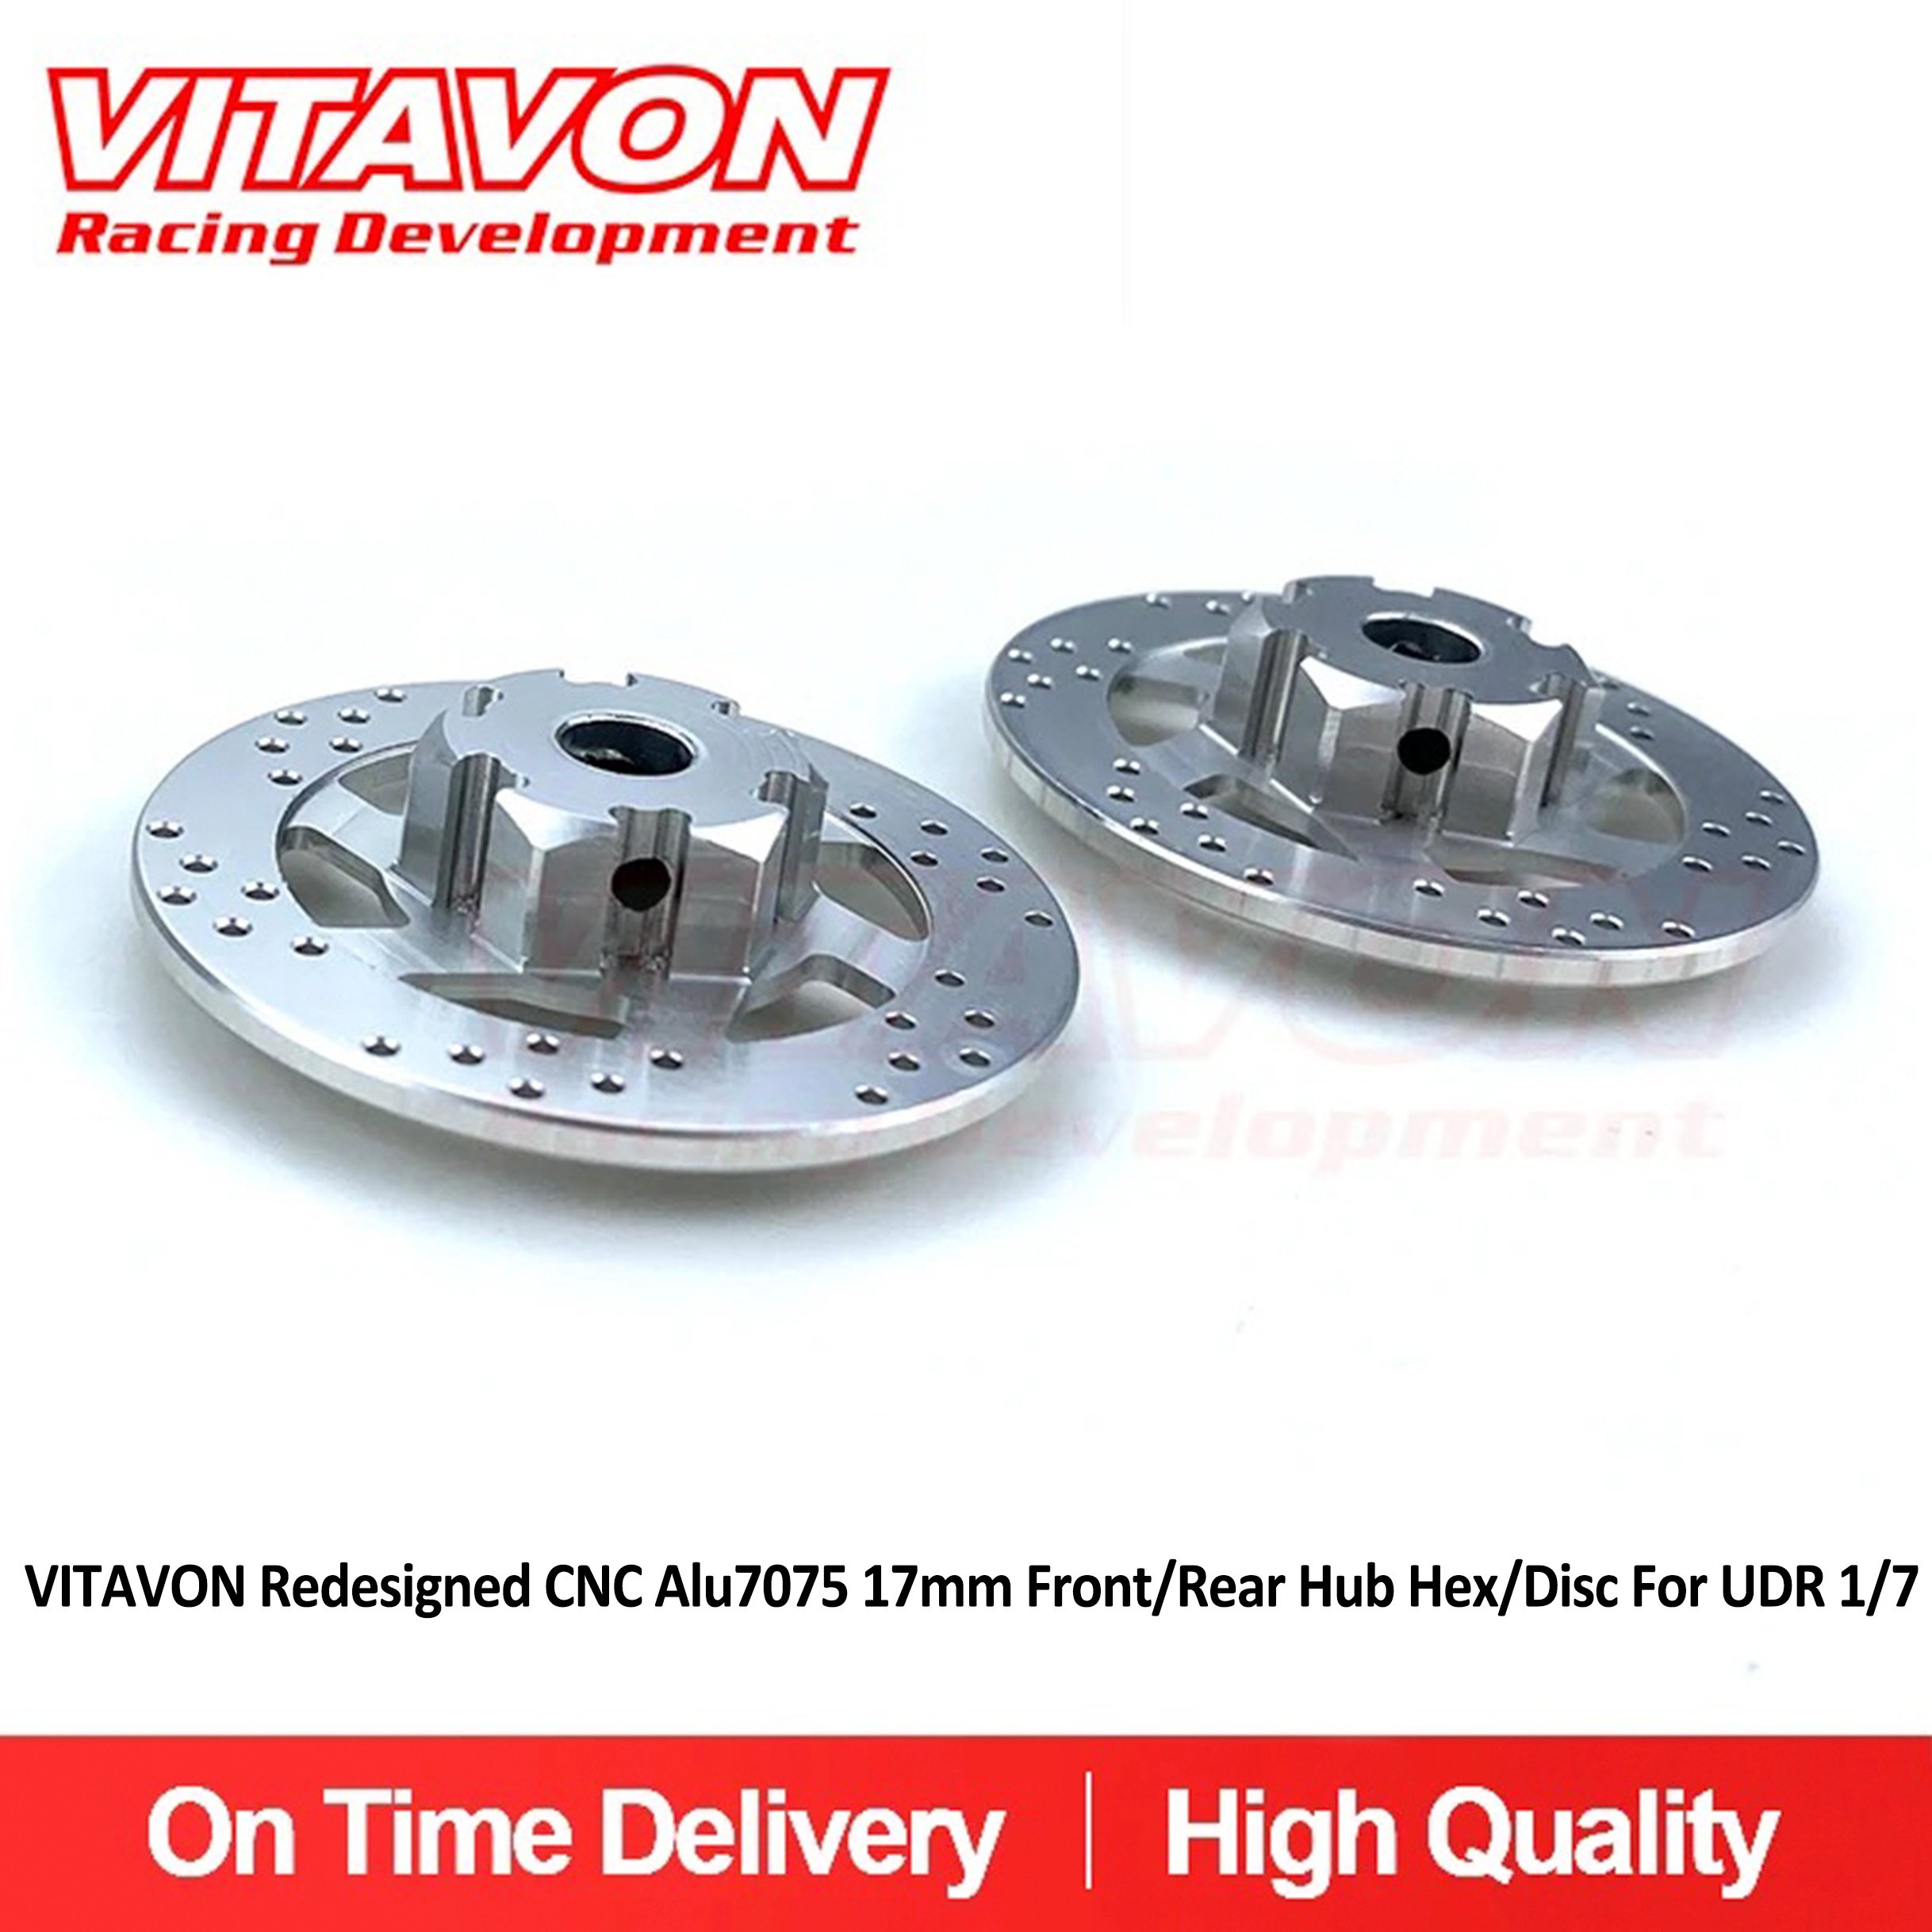 VITAVON Redesigned CNC Alu7075 17mm Front/Rear Hub Hex/Disc Fo Traxxass UDR 1/7